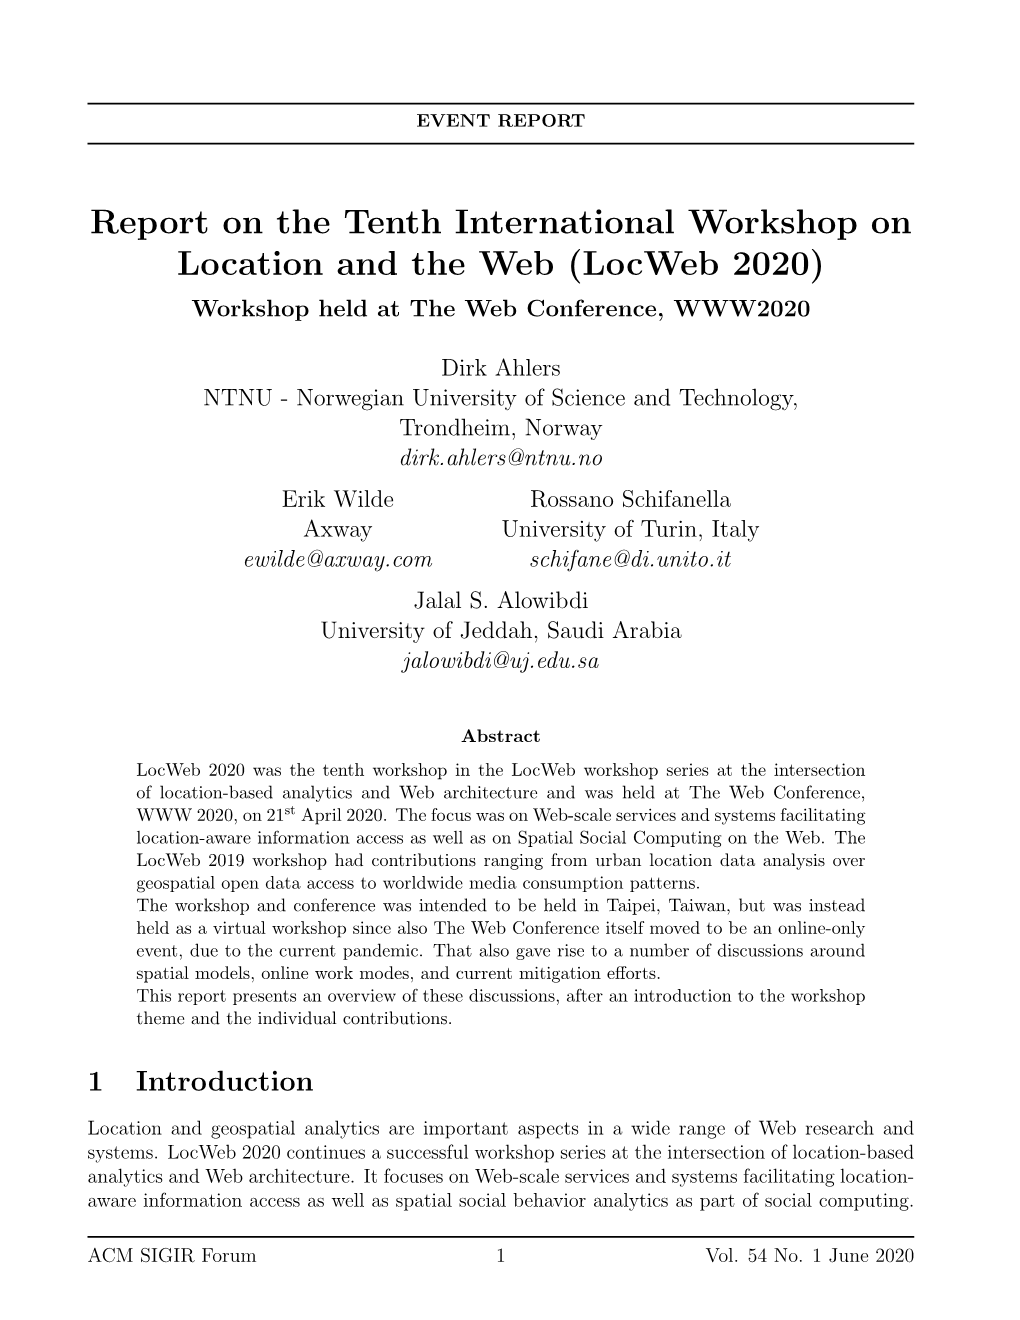 Report on the Tenth International Workshop on Location and the Web (Locweb 2020) Workshop Held at the Web Conference, WWW2020